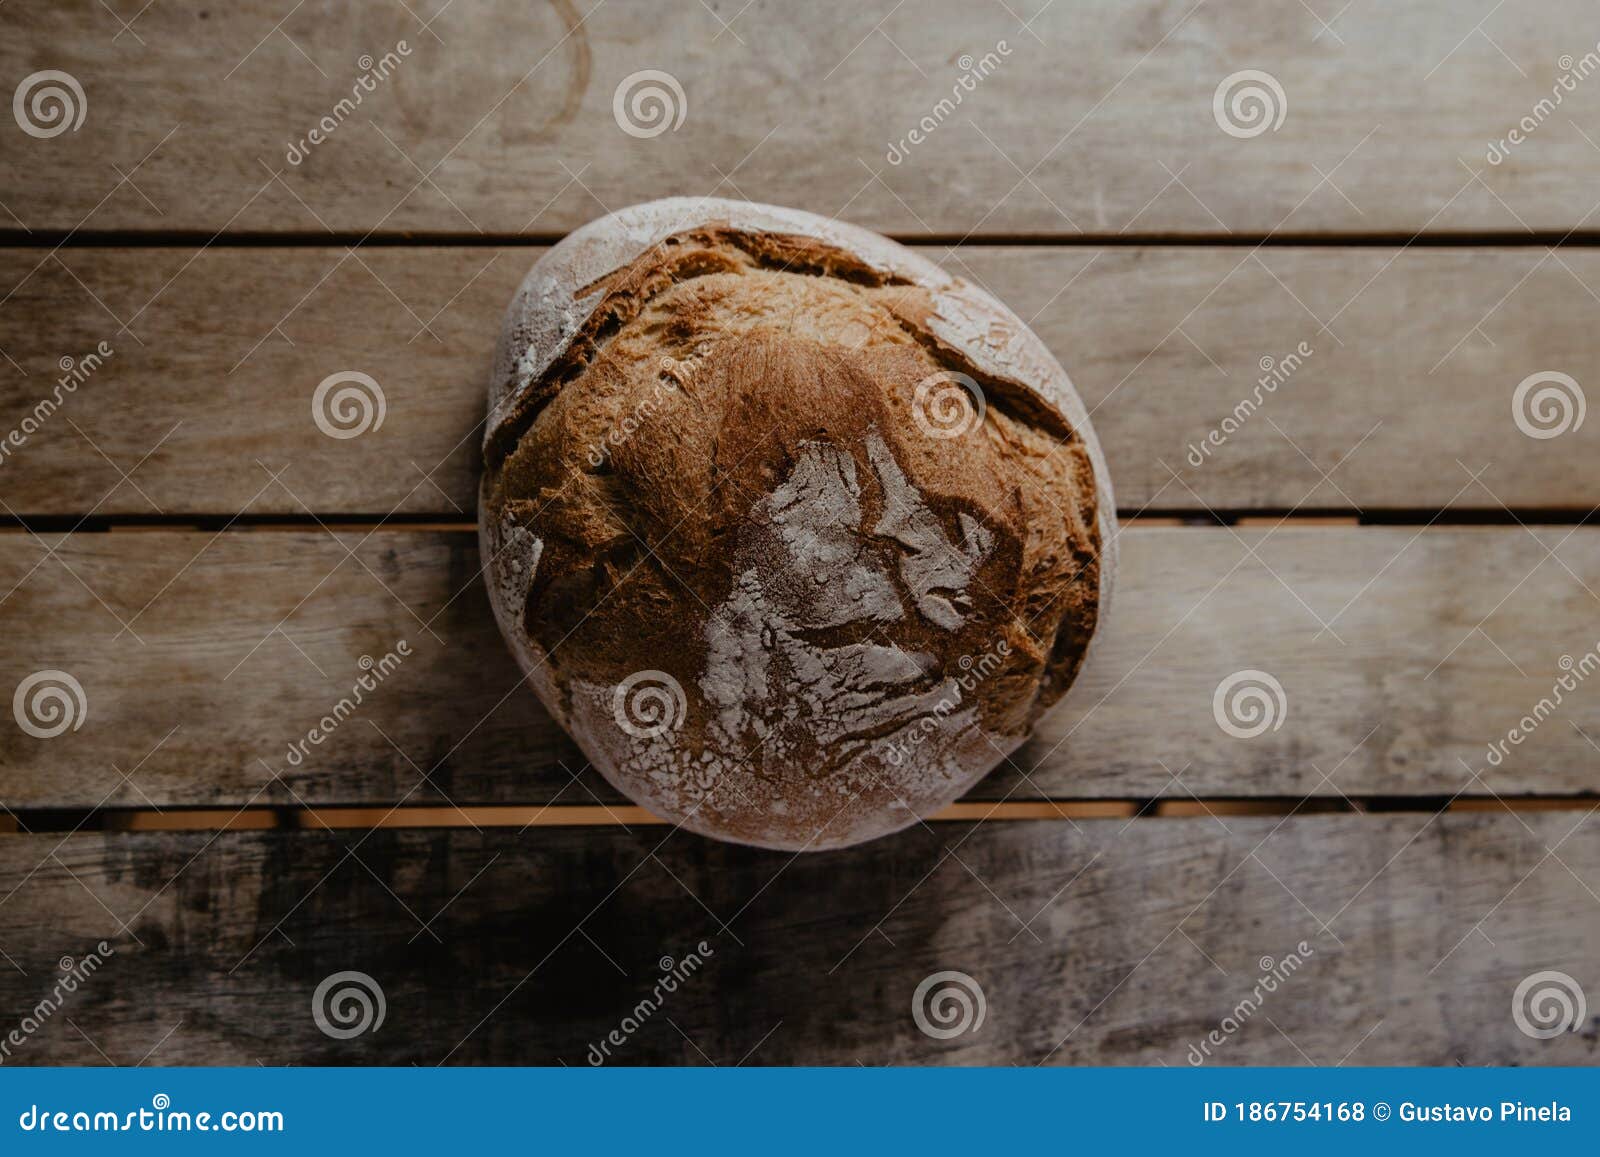 rustic bread, covered in flour, on wooden table